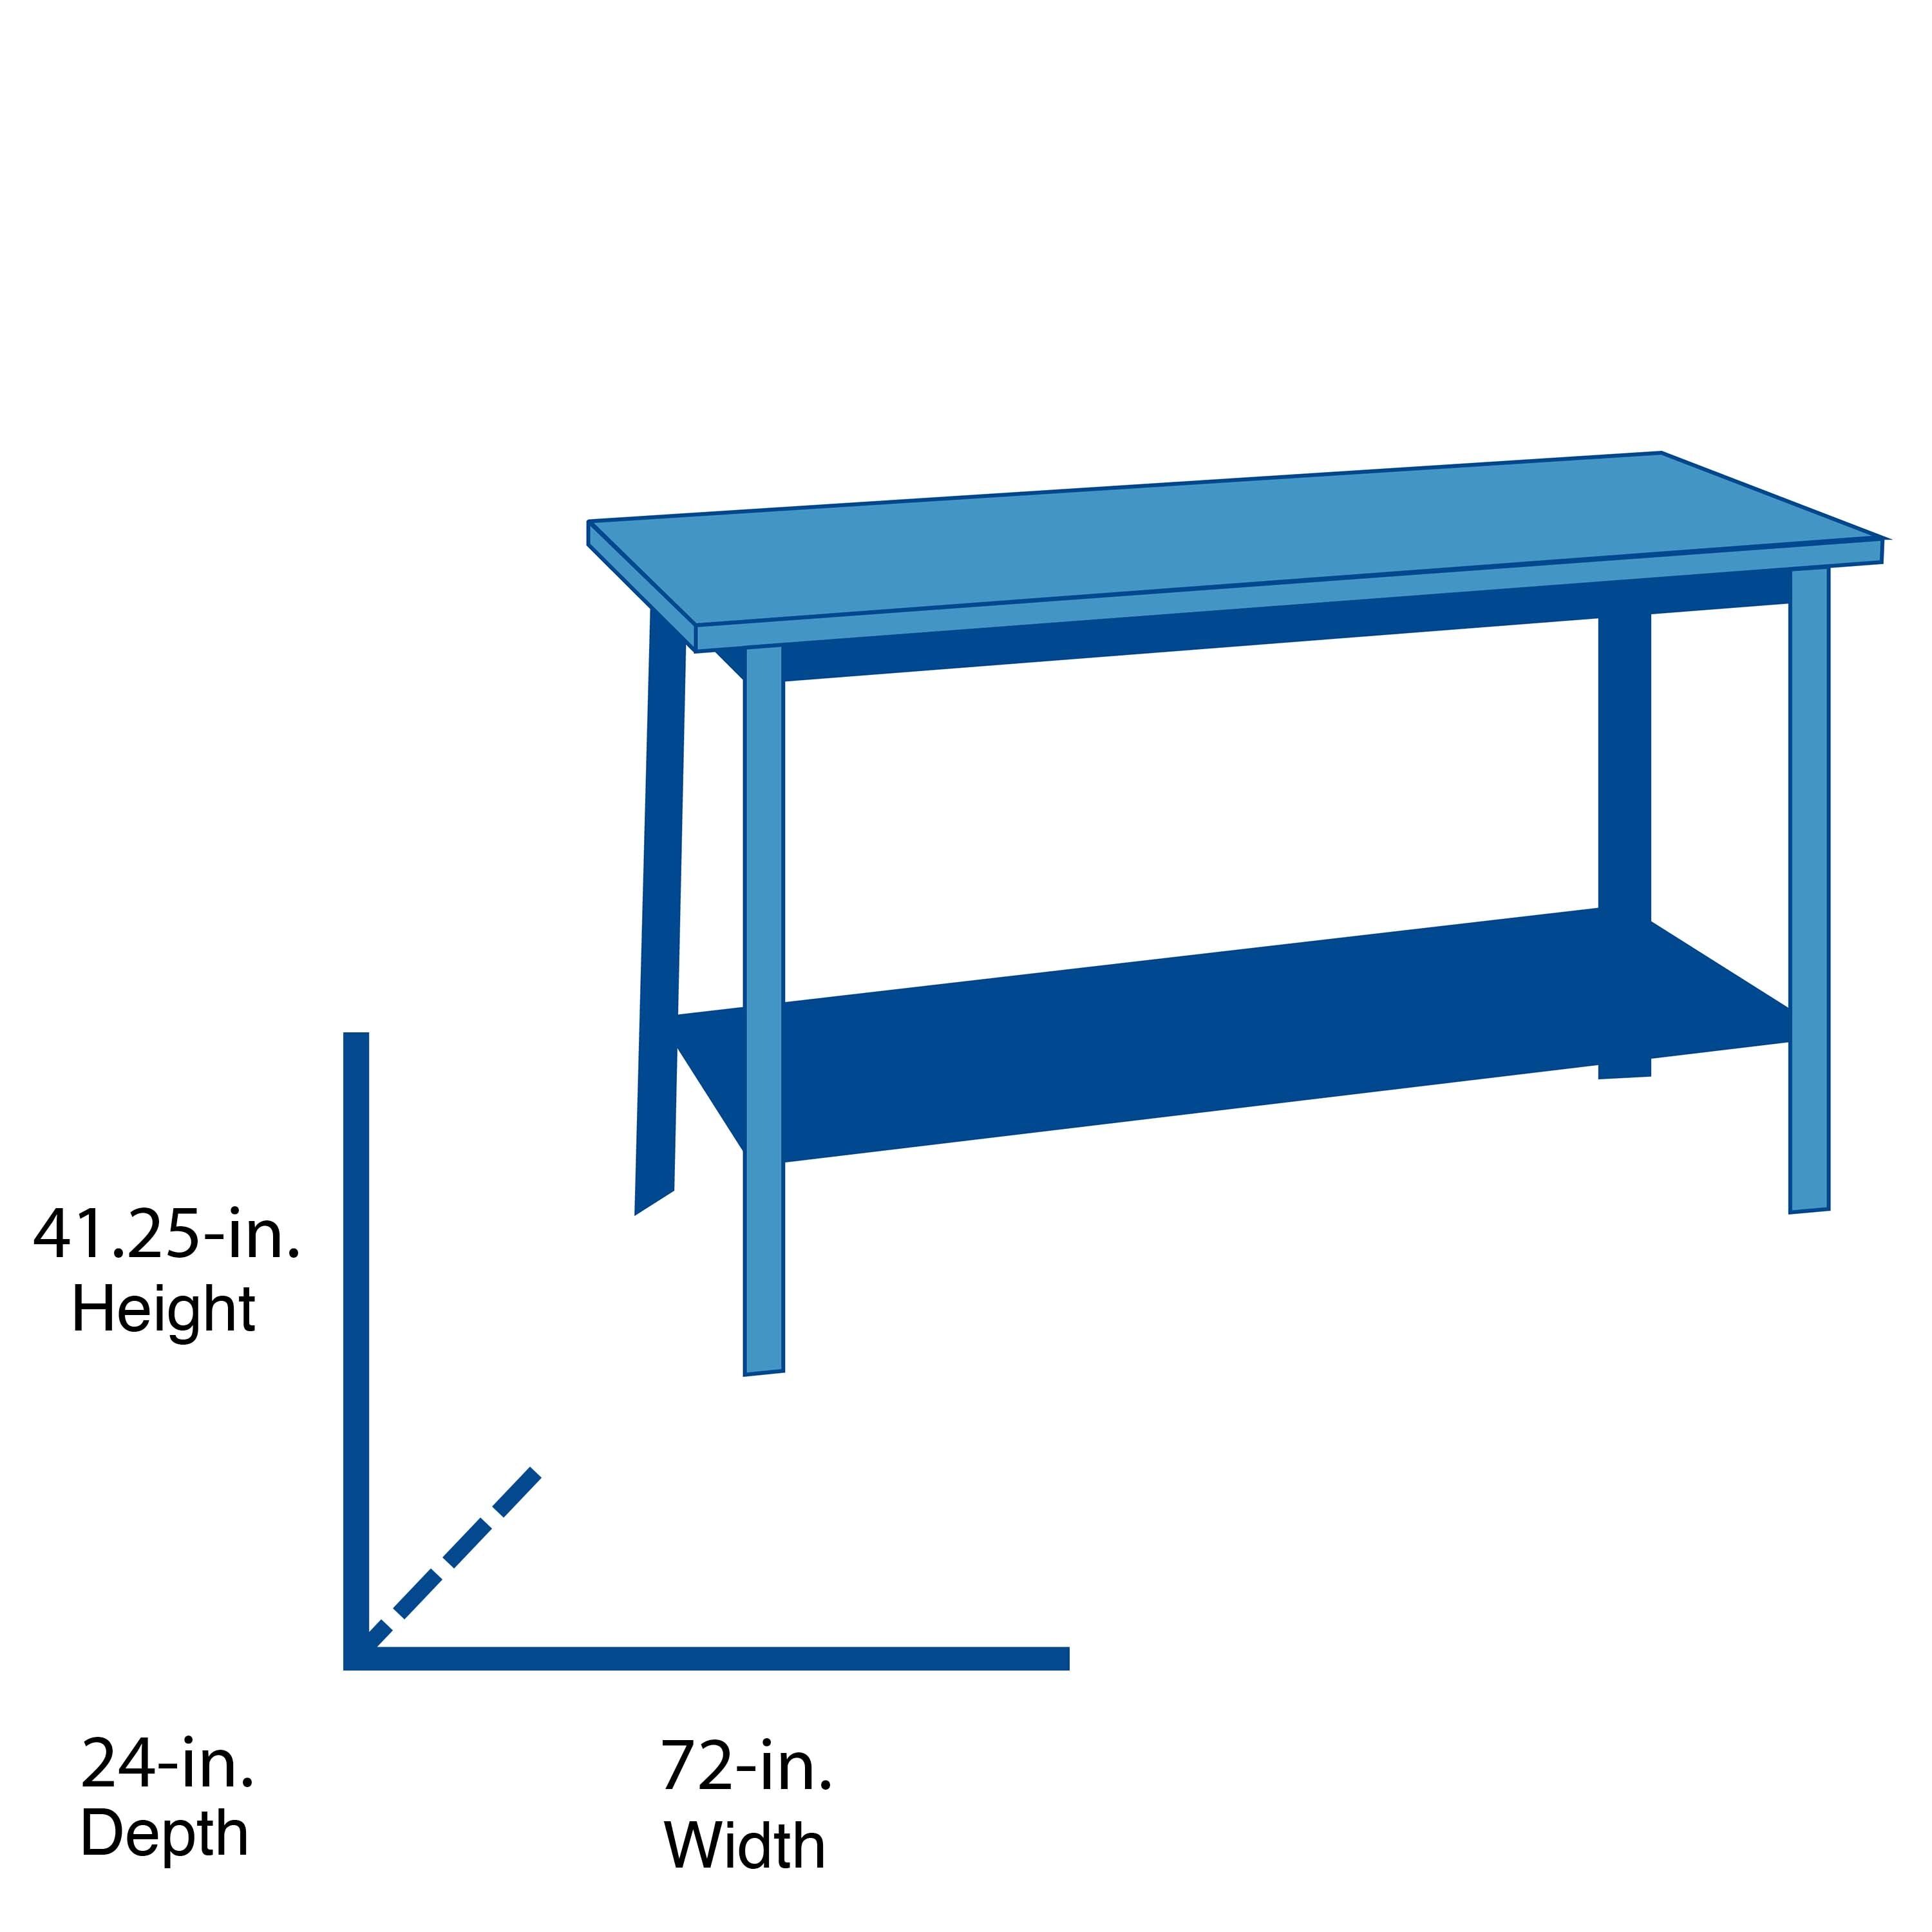 Graphic of CRAFTSMAN Bench & Stationary: Workbench highlighting product features